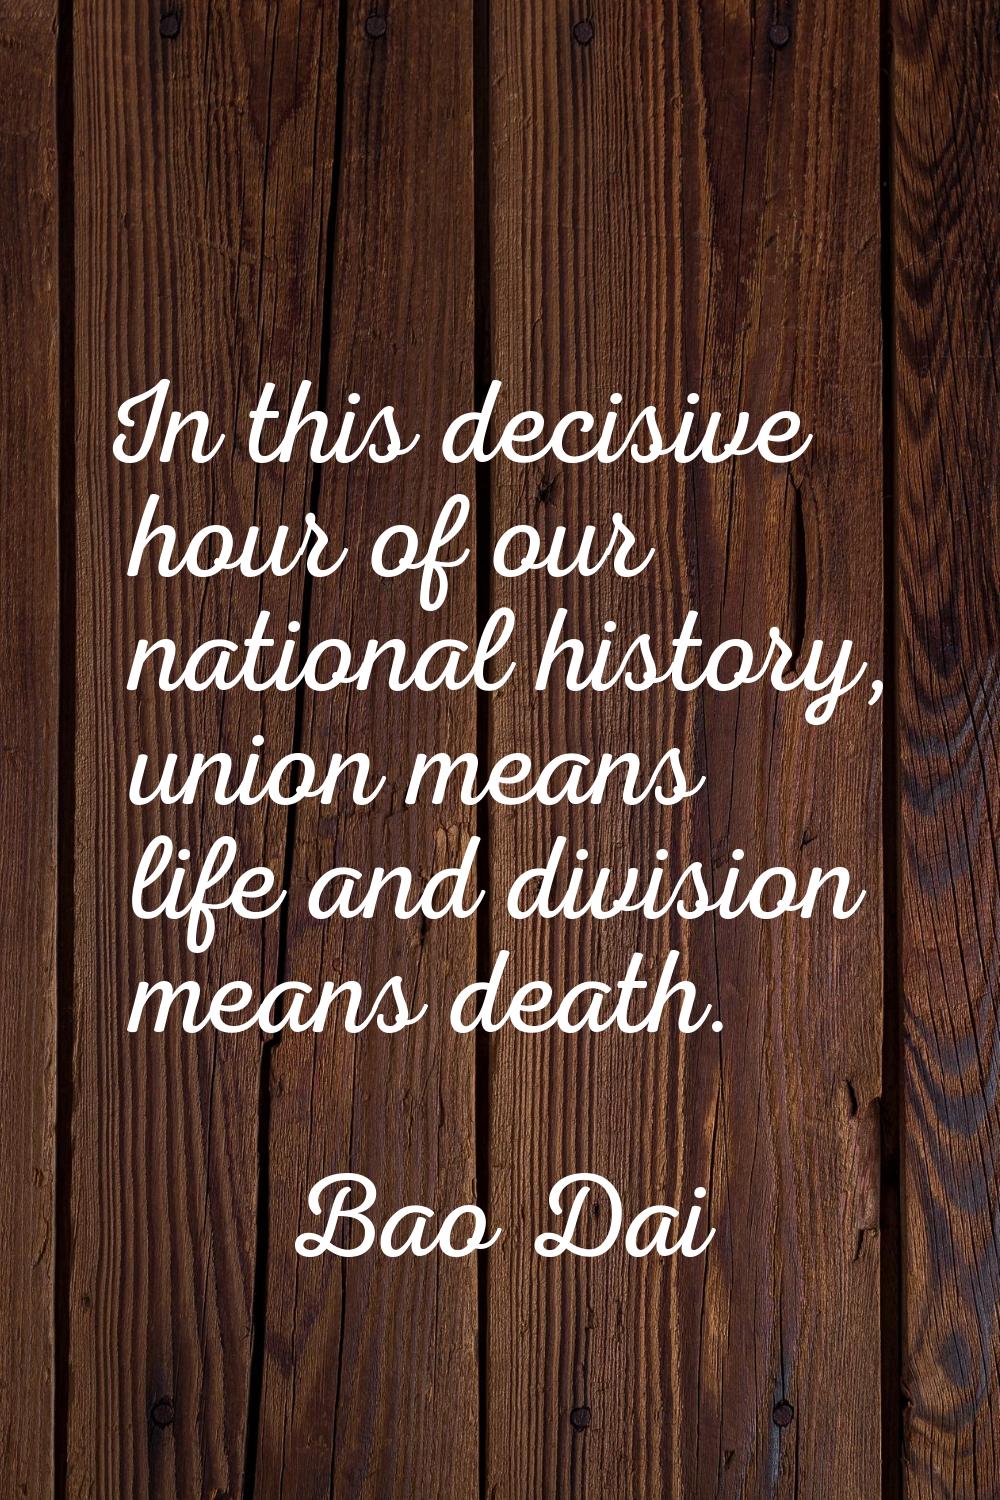 In this decisive hour of our national history, union means life and division means death.